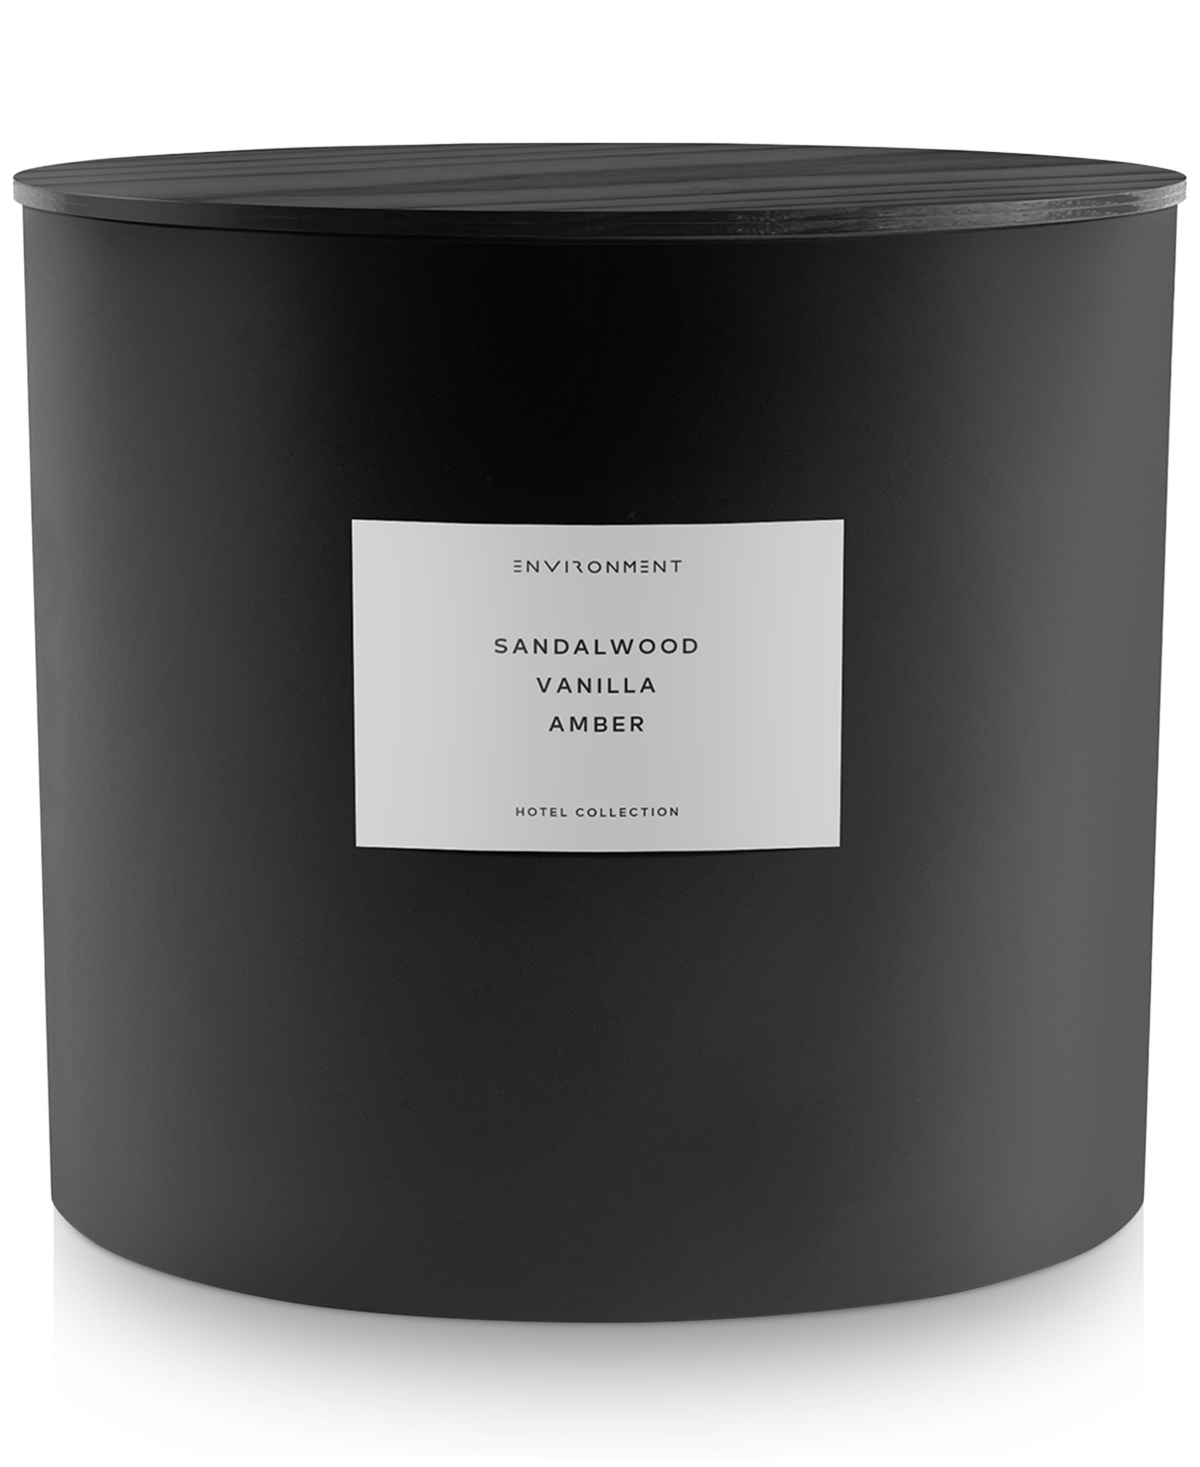 Sandalwood, Vanilla & Amber Candle (Inspired by 5-Star Hotels), 55 oz.